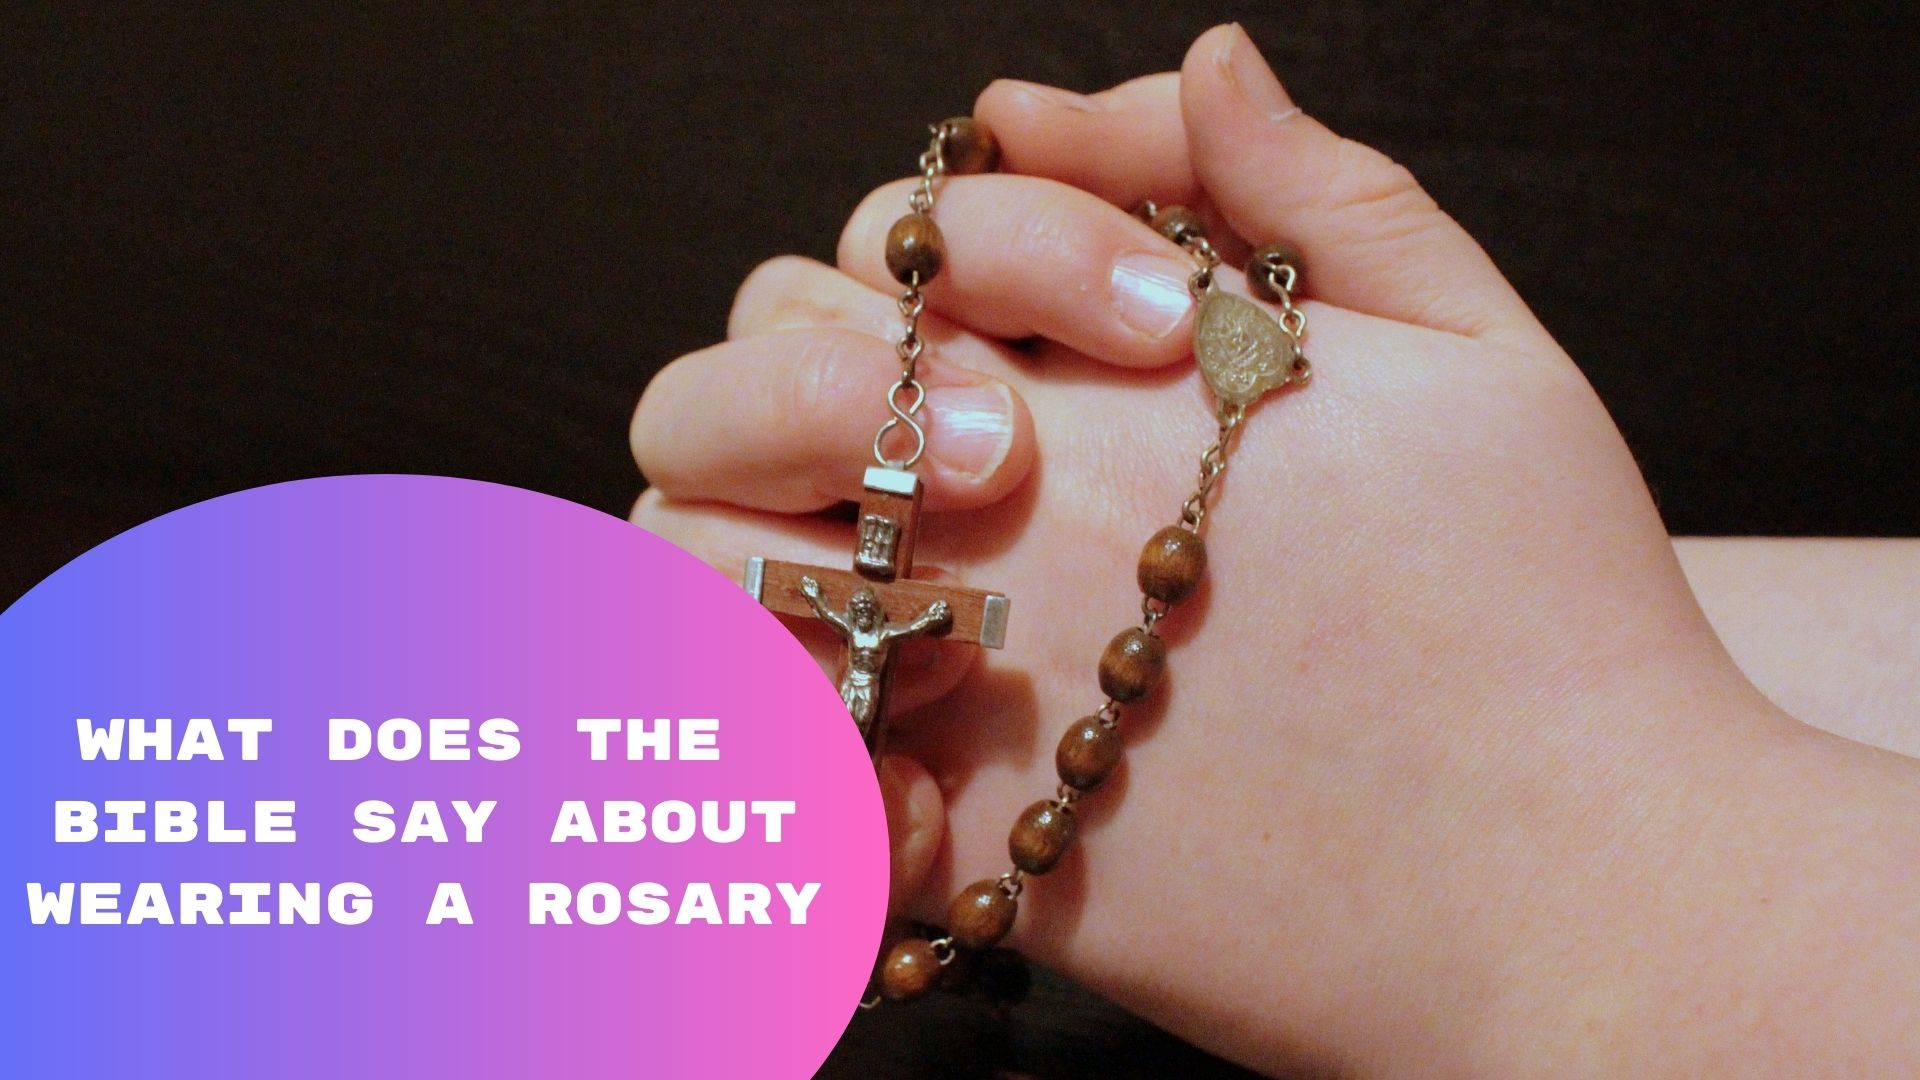 What Does The Bible Say About Wearing A Rosary?